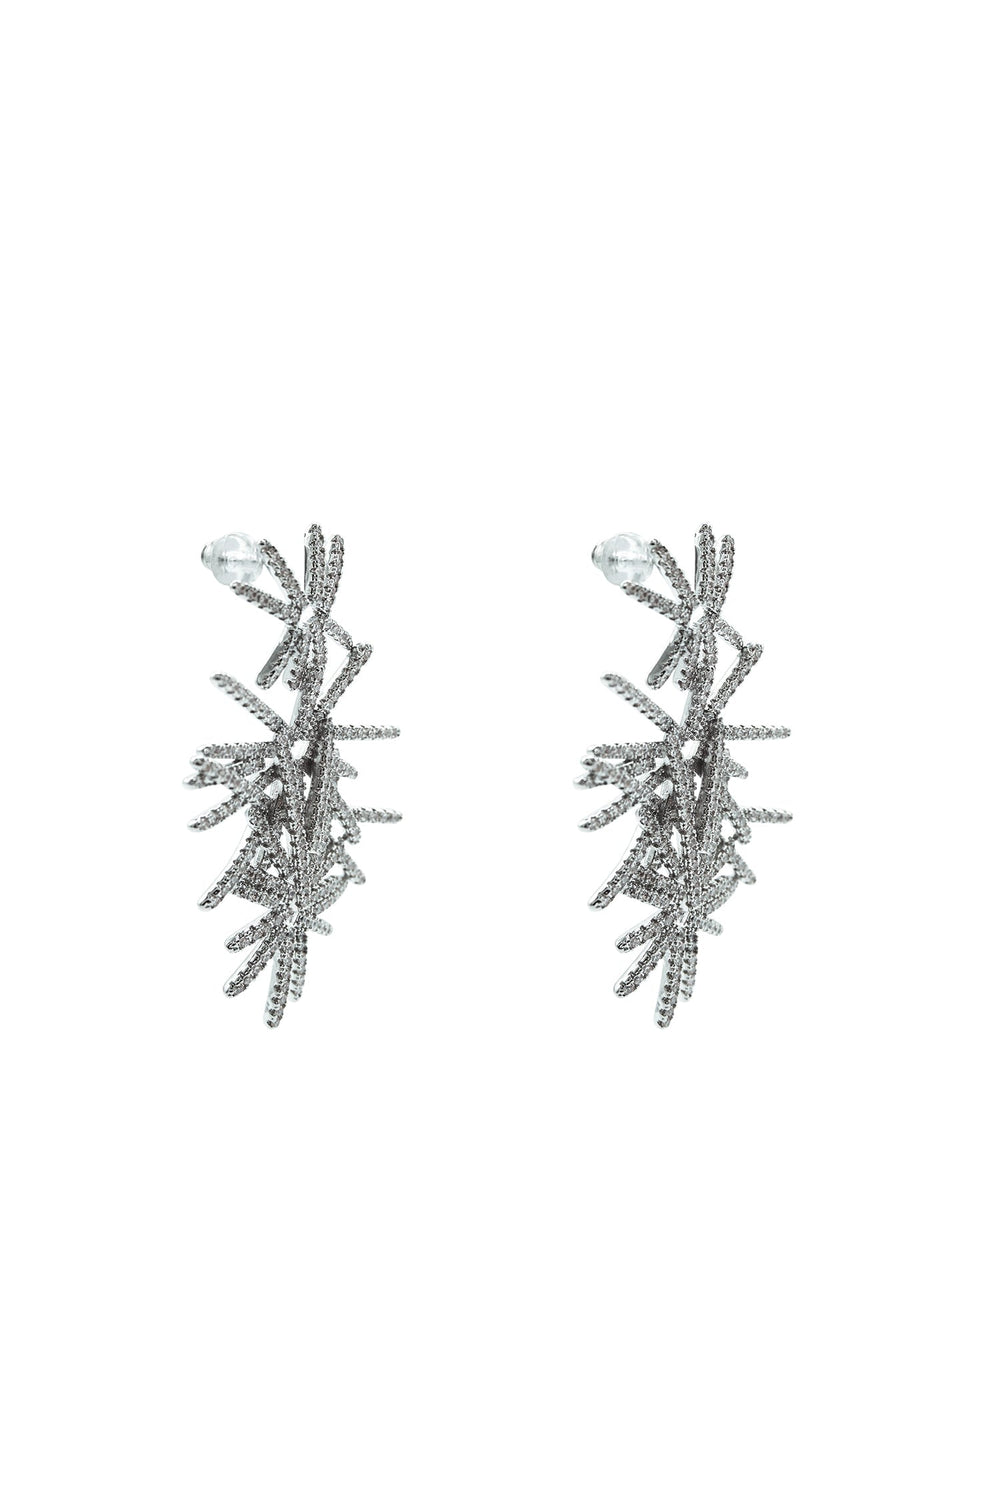 Anais Silver Statement Earrings